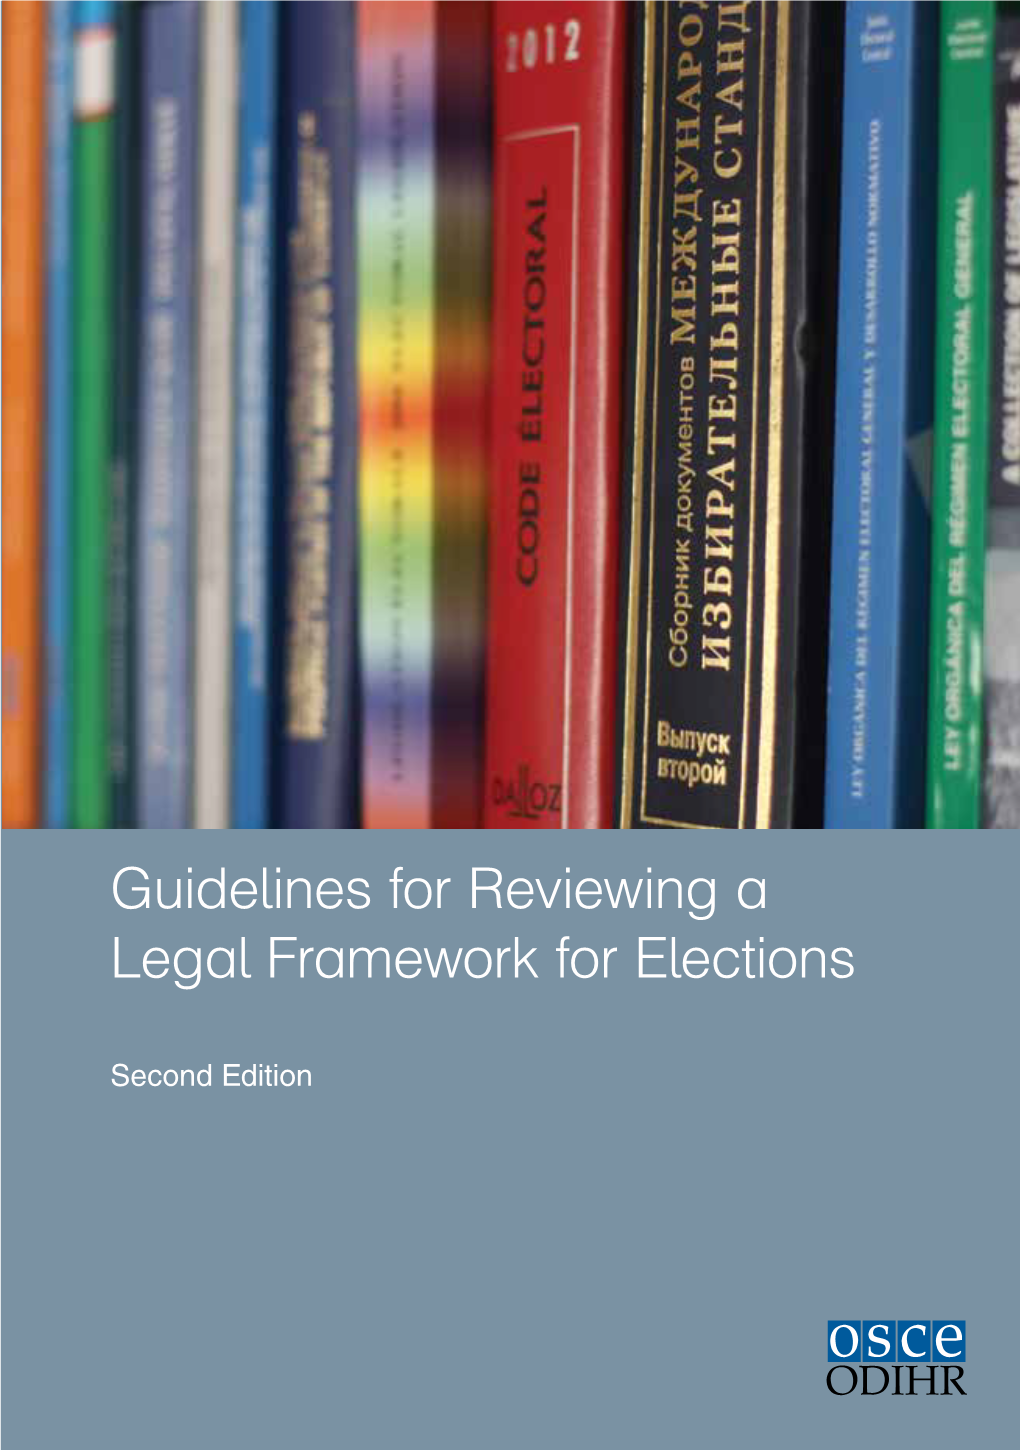 Guidelines for Reviewing a Legal Framework for Elections